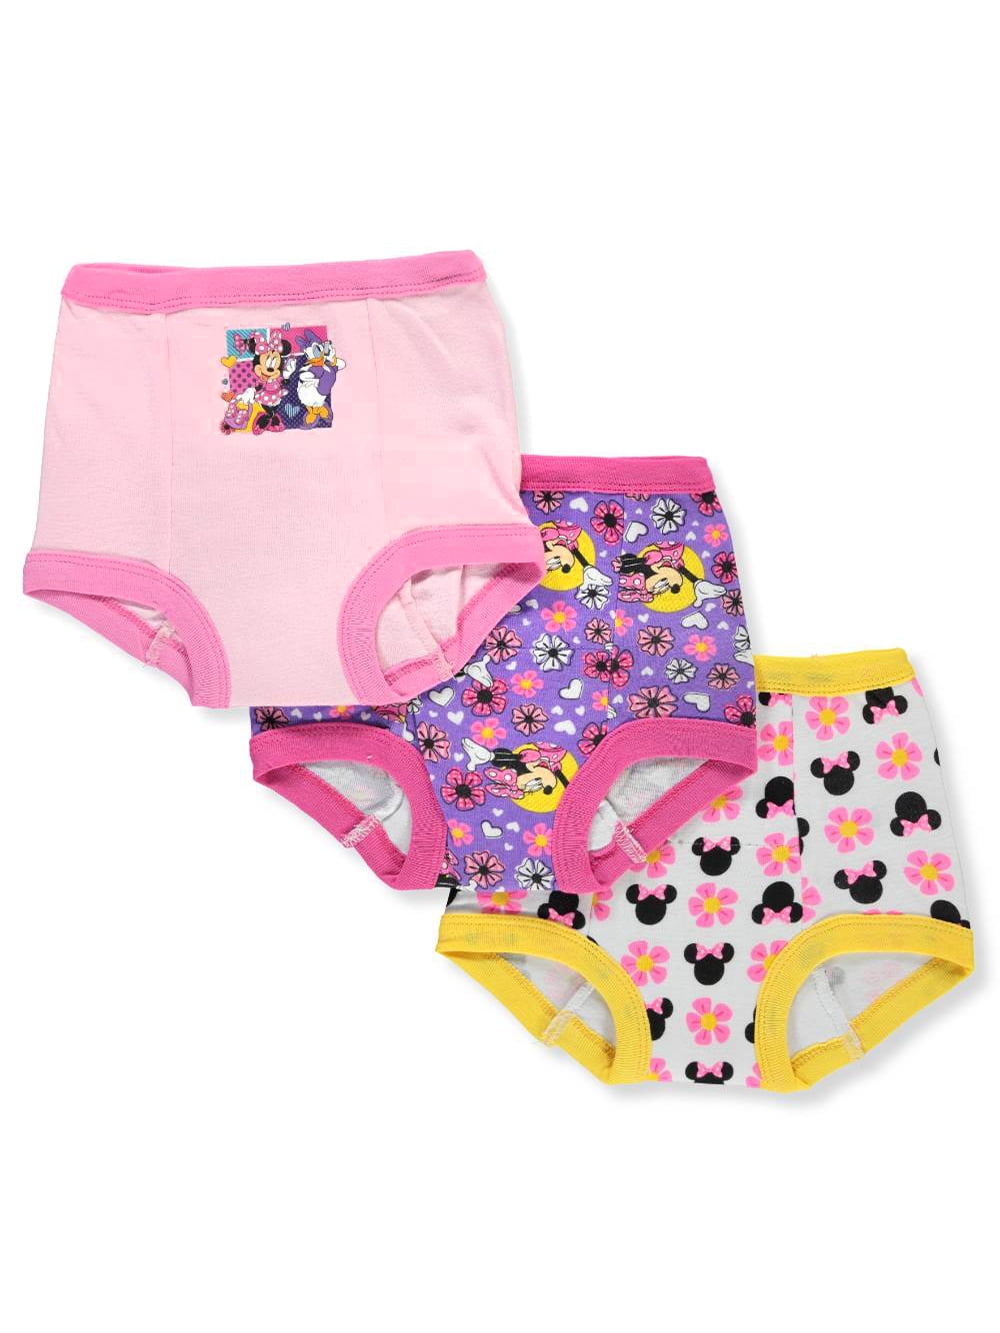 New 3prs Disney Jrs MINNIE MOUSE PANTIES or Underwear Toddler Girl